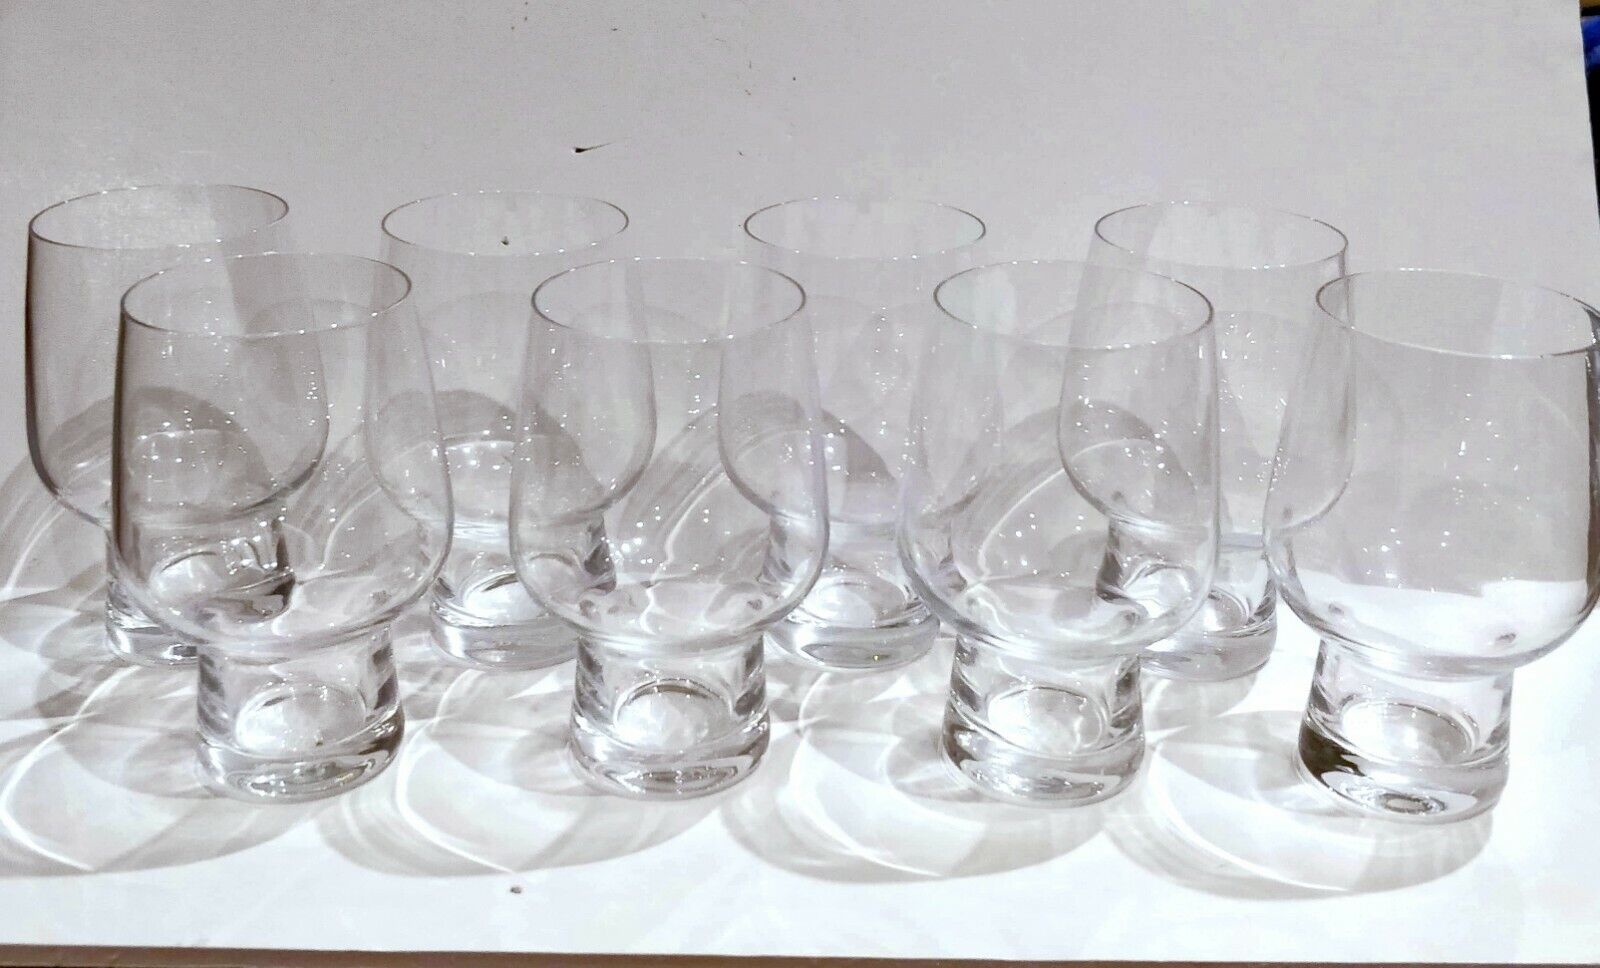 ALESSI for DELTA AIRLINES Cordial Short Stem Glasses Wine Glass Set of 8